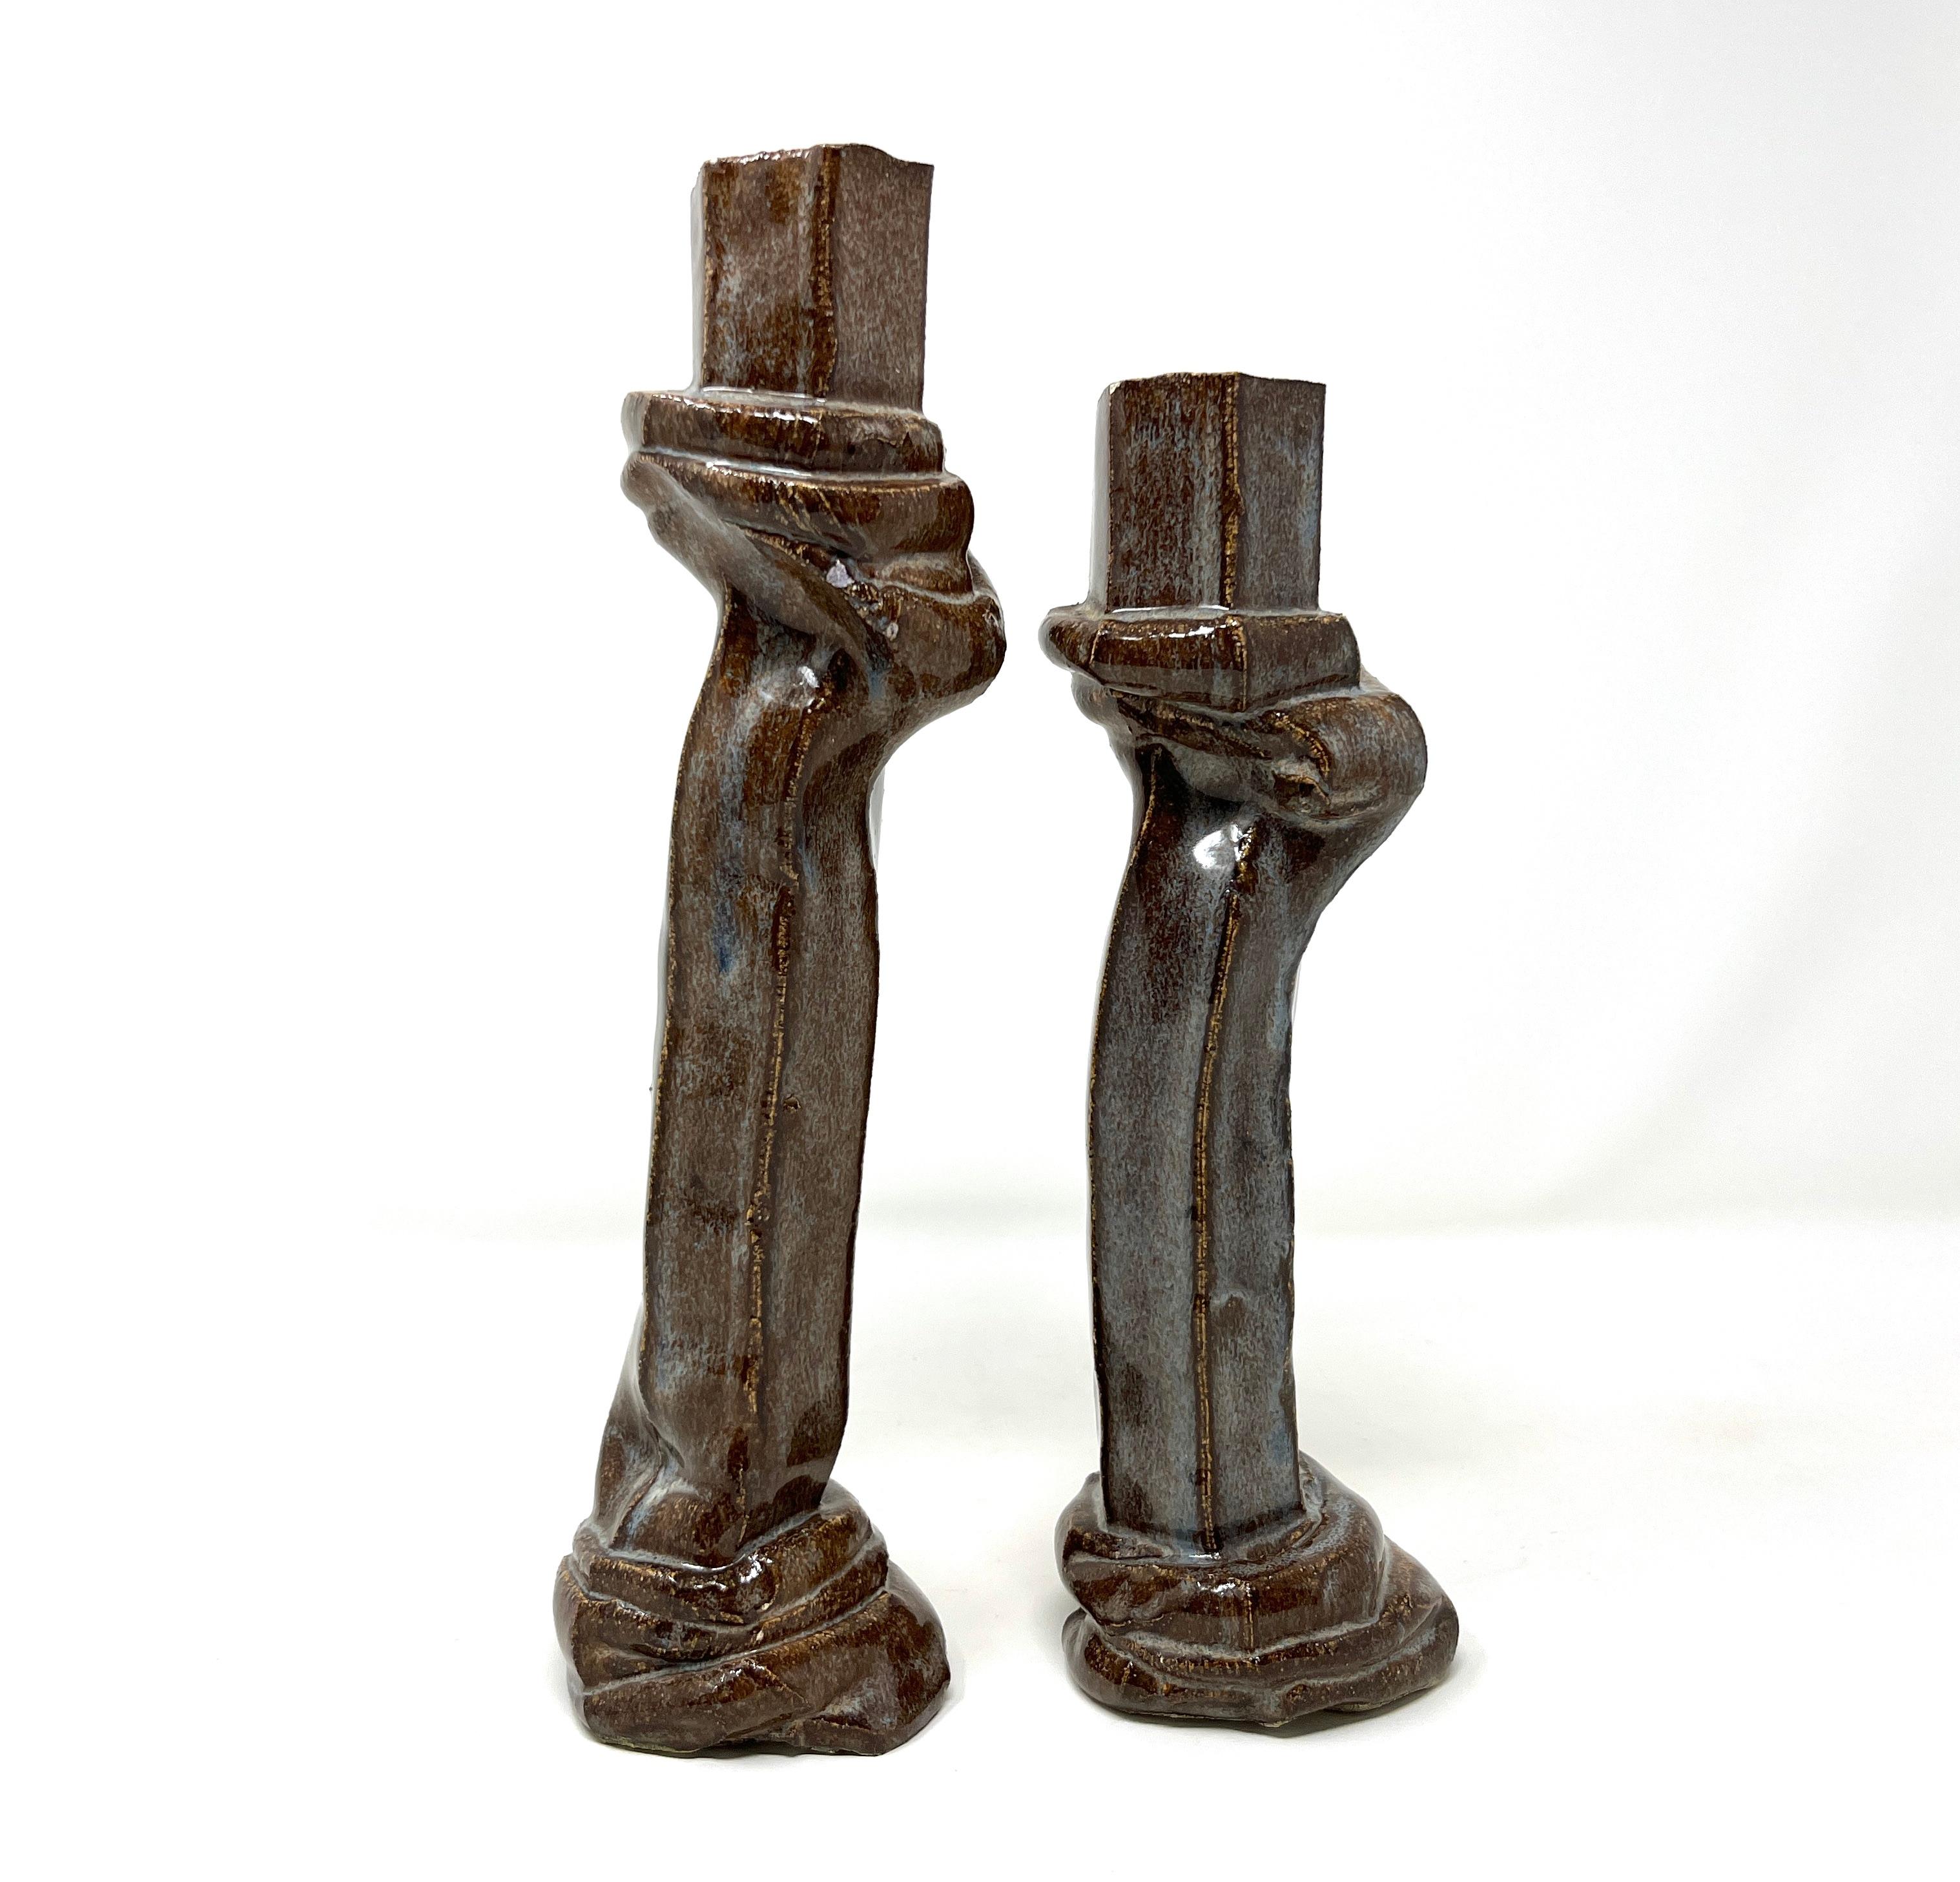 Handmade pair Bohemian style ceramic candlesticks with gorgeous brown and blue slightly iridescent glaze. One of a kind, they are slightly mismatched, with one a touch shorter. Beautiful statement piece for a glamorous table setting. Probably made